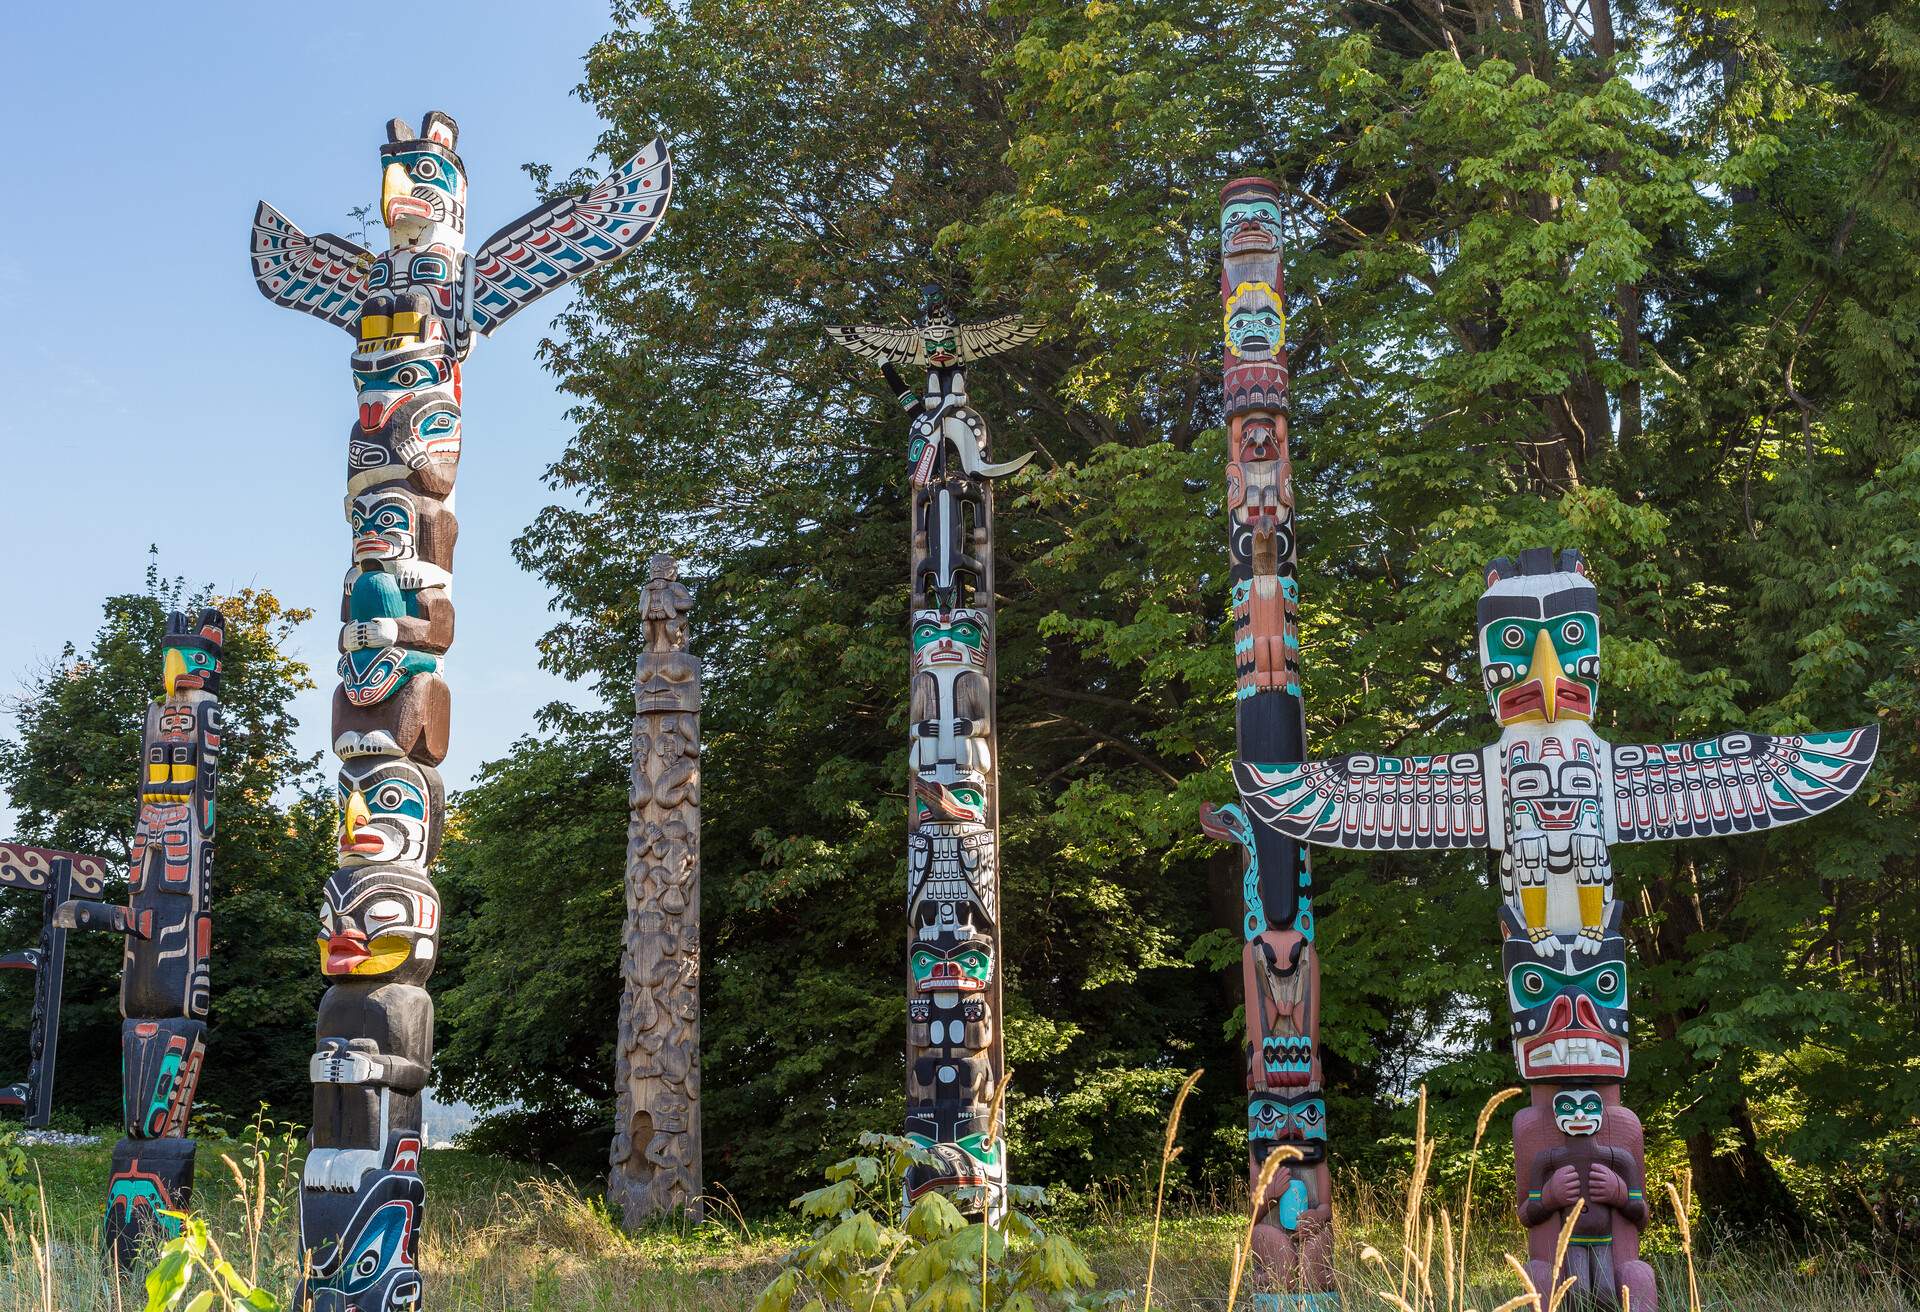 Part of the totem poles displayed at Brockton Point, Stanley Park, Vancouver, BC. These totem poles are pieces of BC First Nations artistry. Four of the original totems were from Alert Bay on Vancouver Island; additional pieces were from the Queen Charlotte Islands and rivers Inlet on the central coast of BC.Because many of the original totems were carved as early as the 1880s, they have been sent to museums for preservation. The totems at Brockton Point are new ones commissioned or loaned to the park between 1986 and 1992.